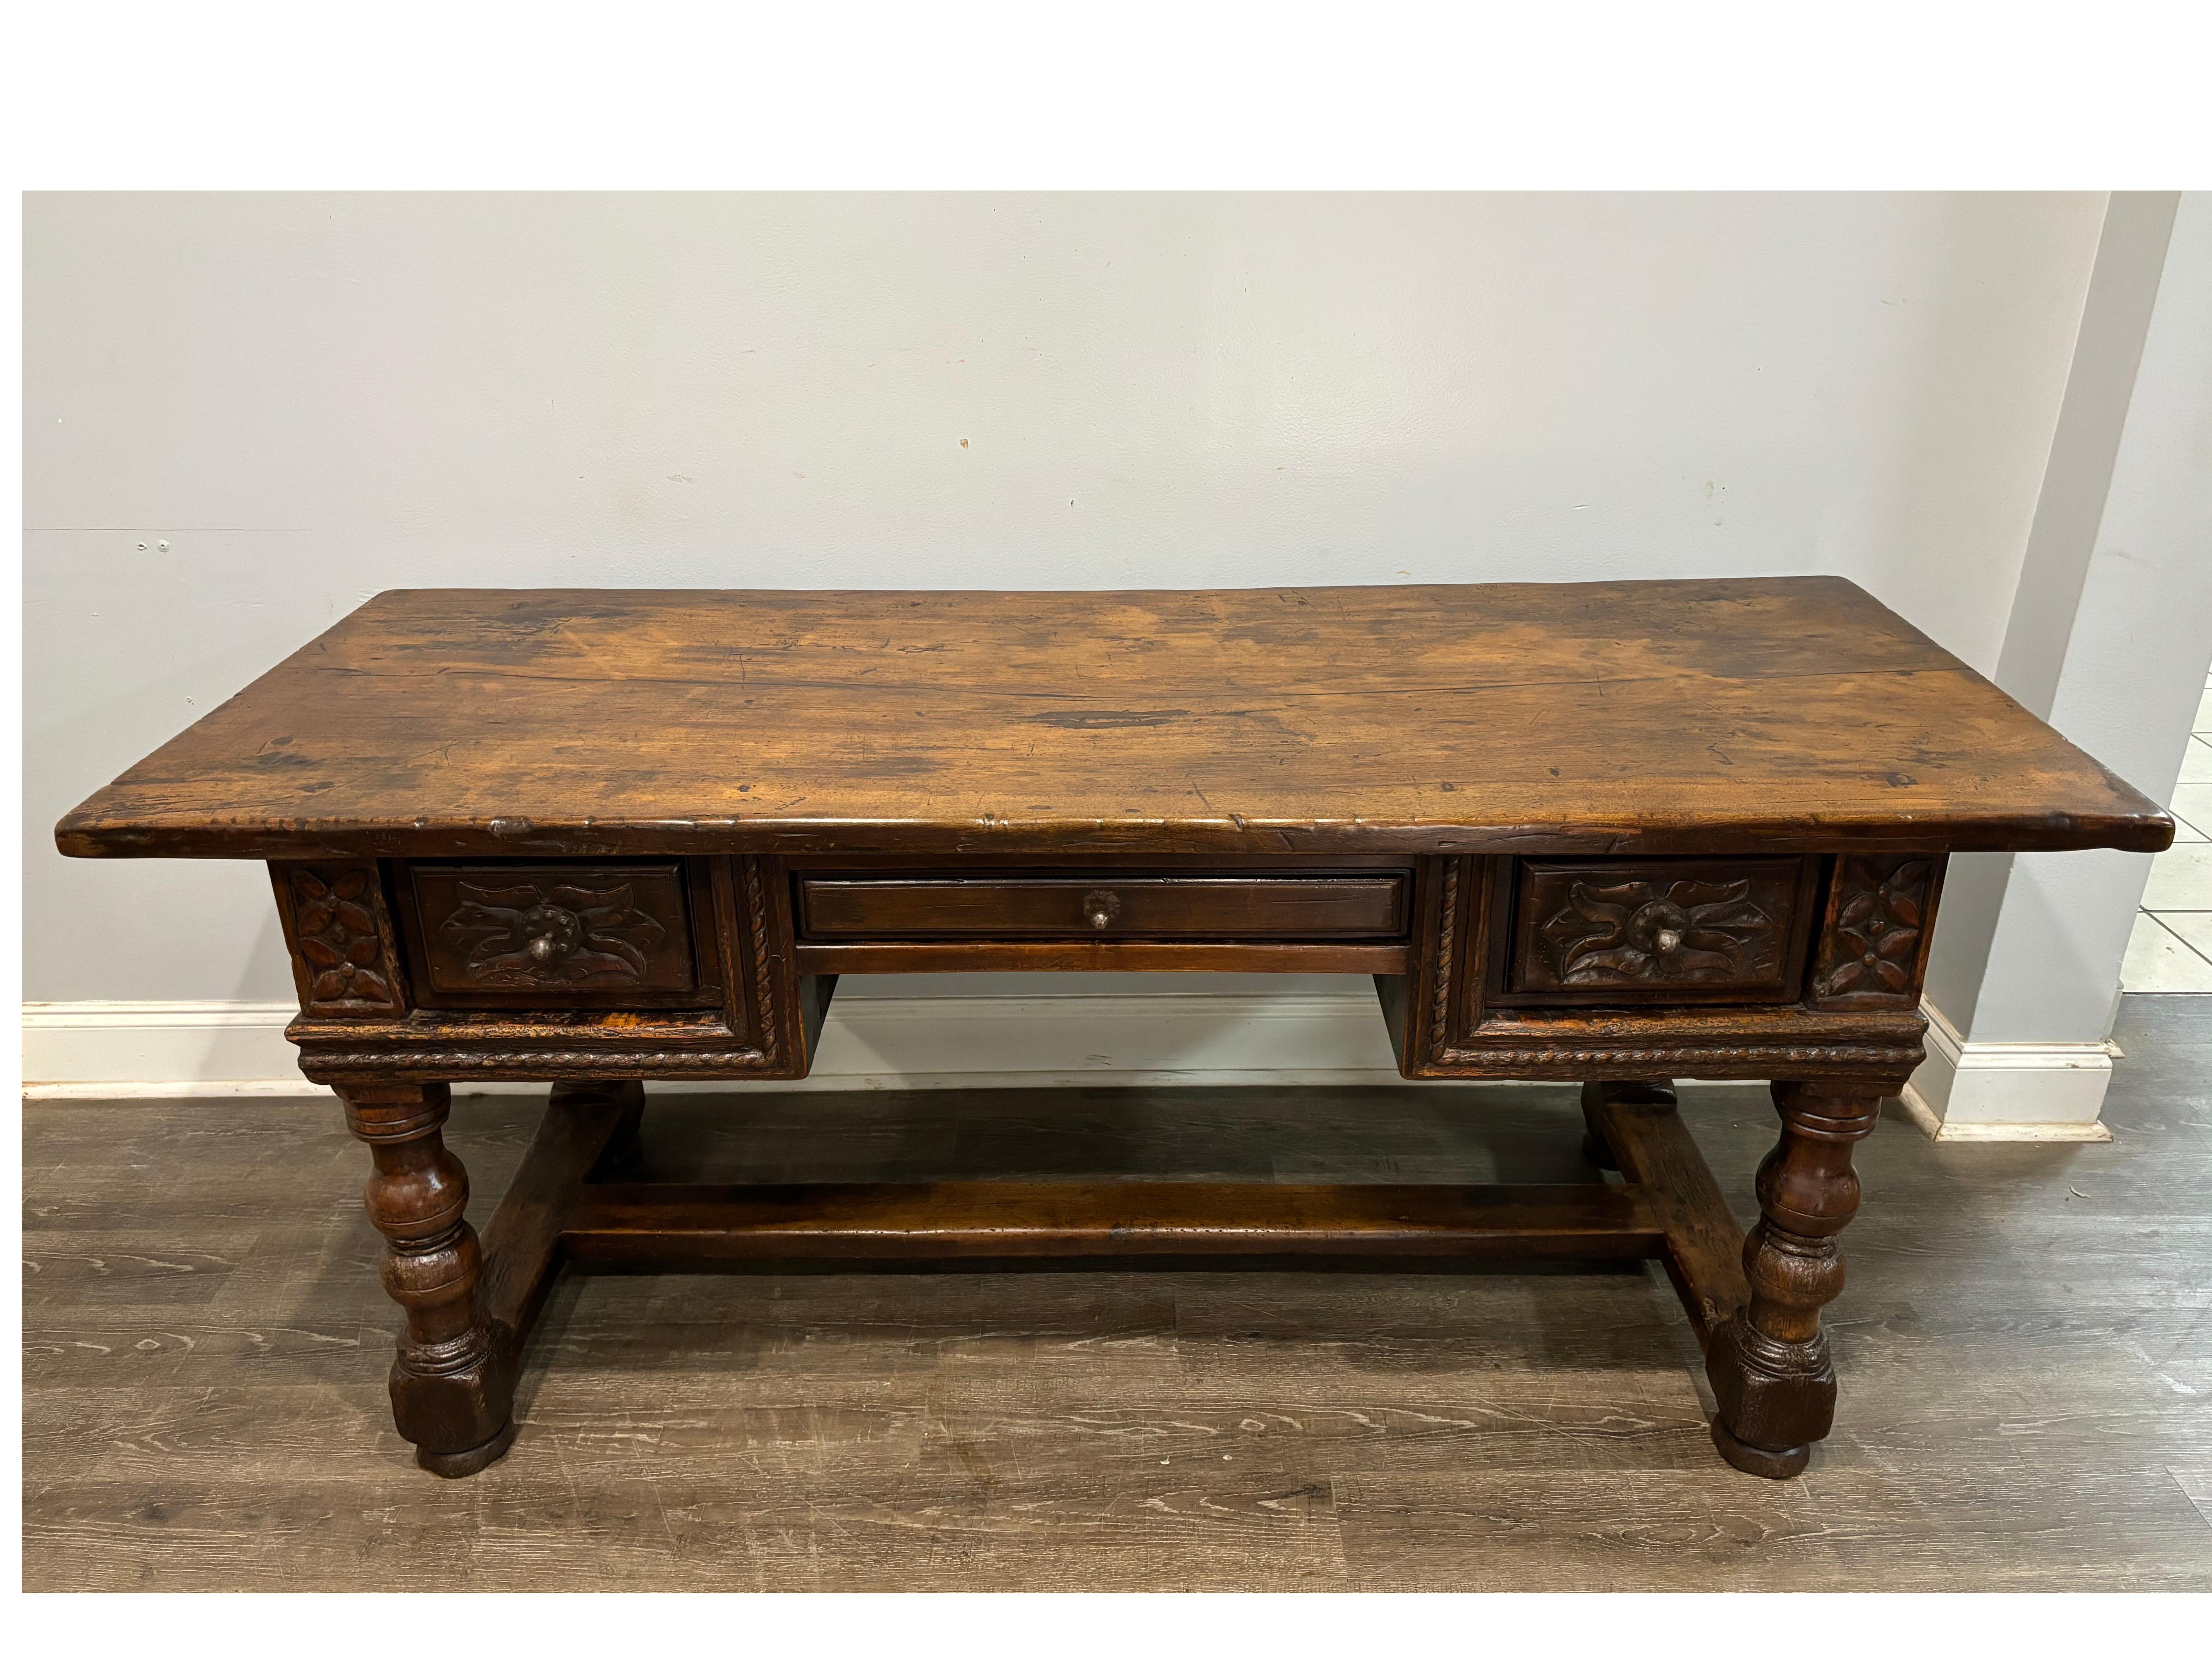 Exceptional desk made of walnut with a wonderful carvings used by the age. The height from the floor to the base of the center drawer is 25''H.